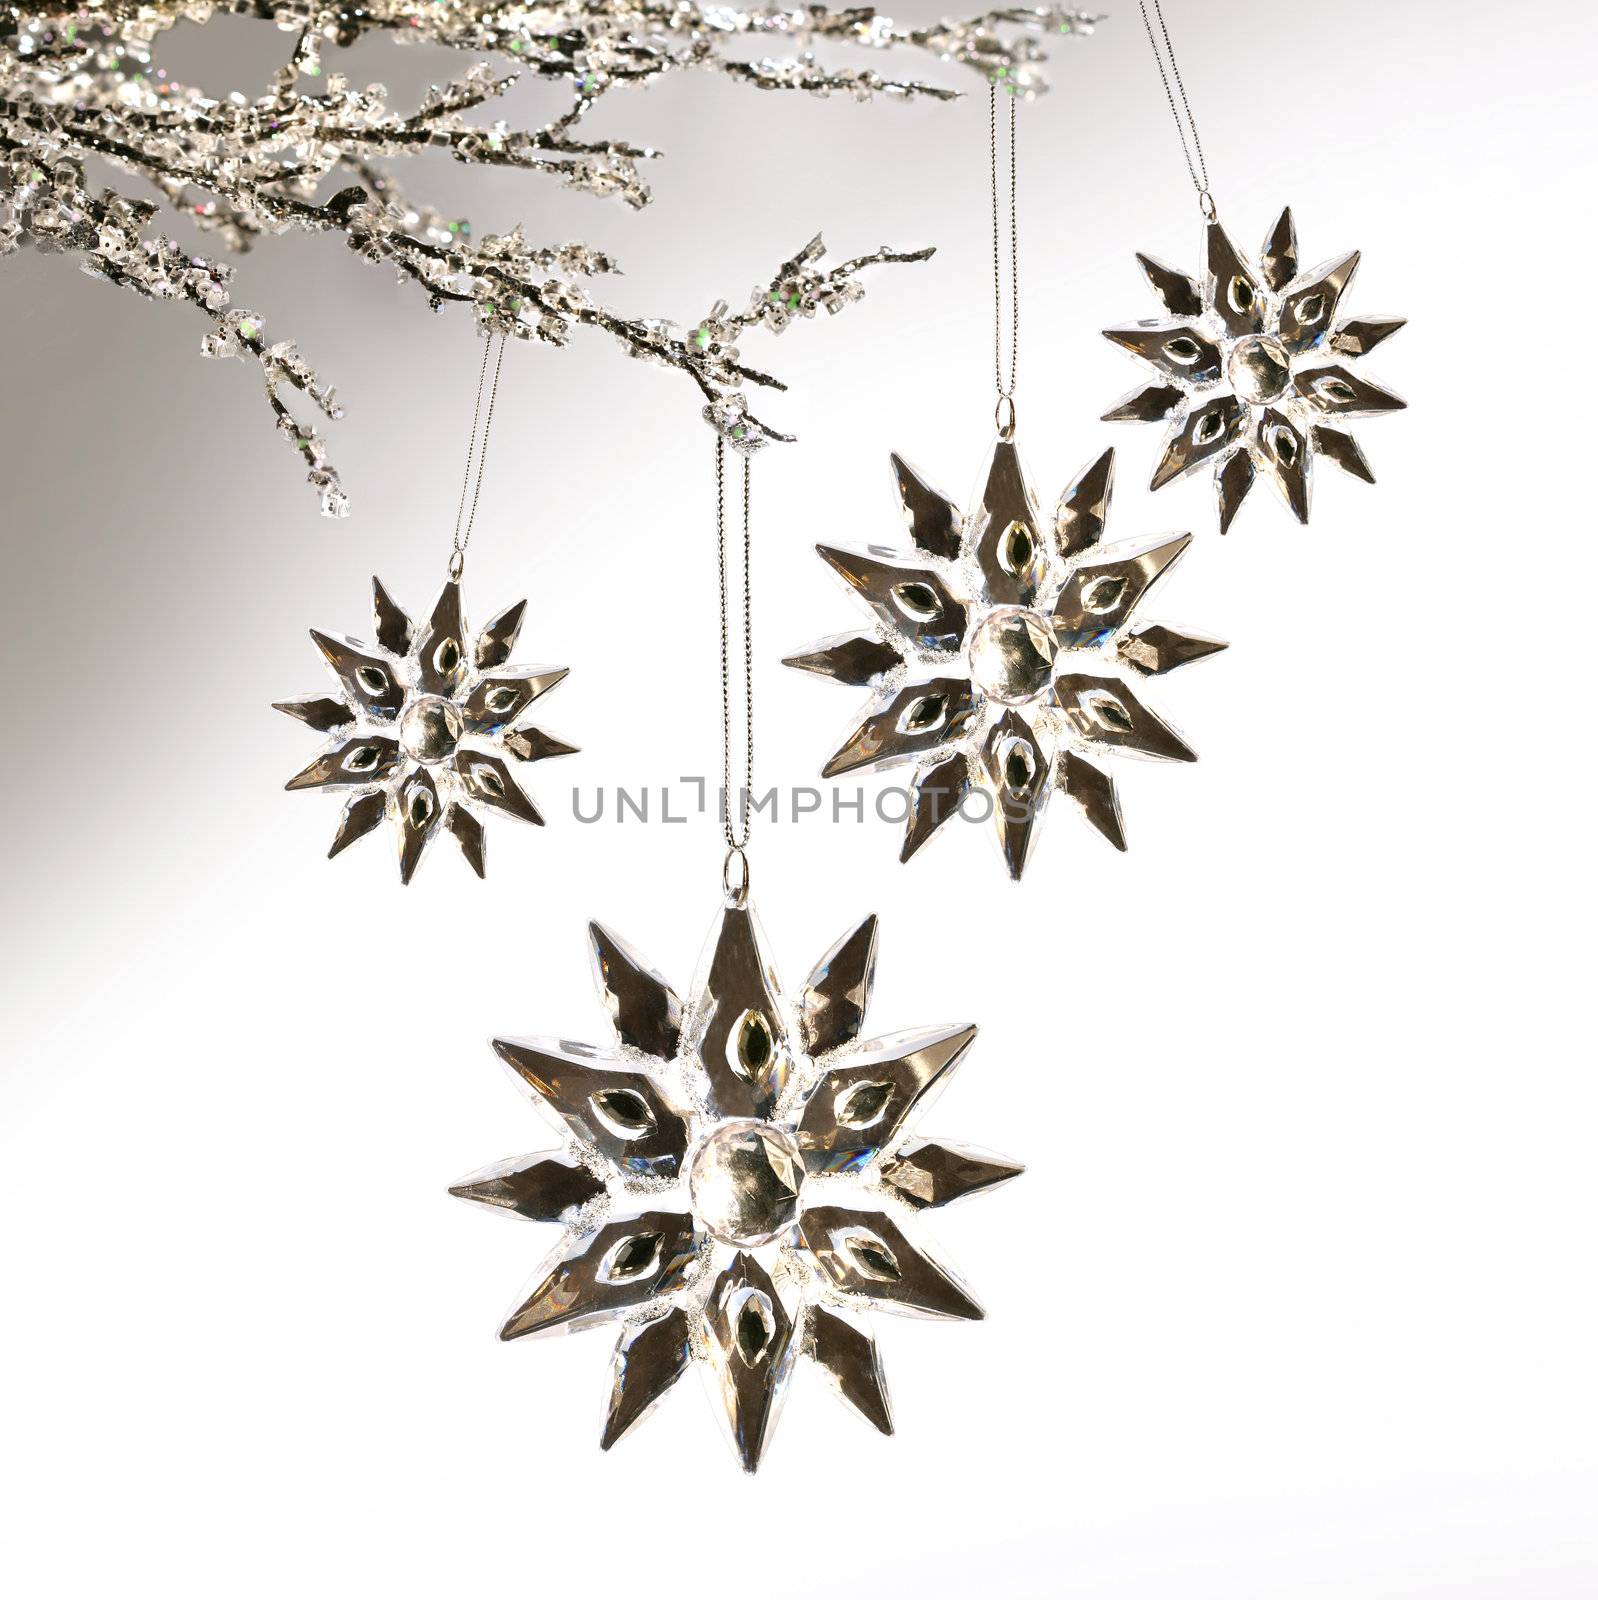 Silver snowflakes hanging against pale grey  by Sandralise